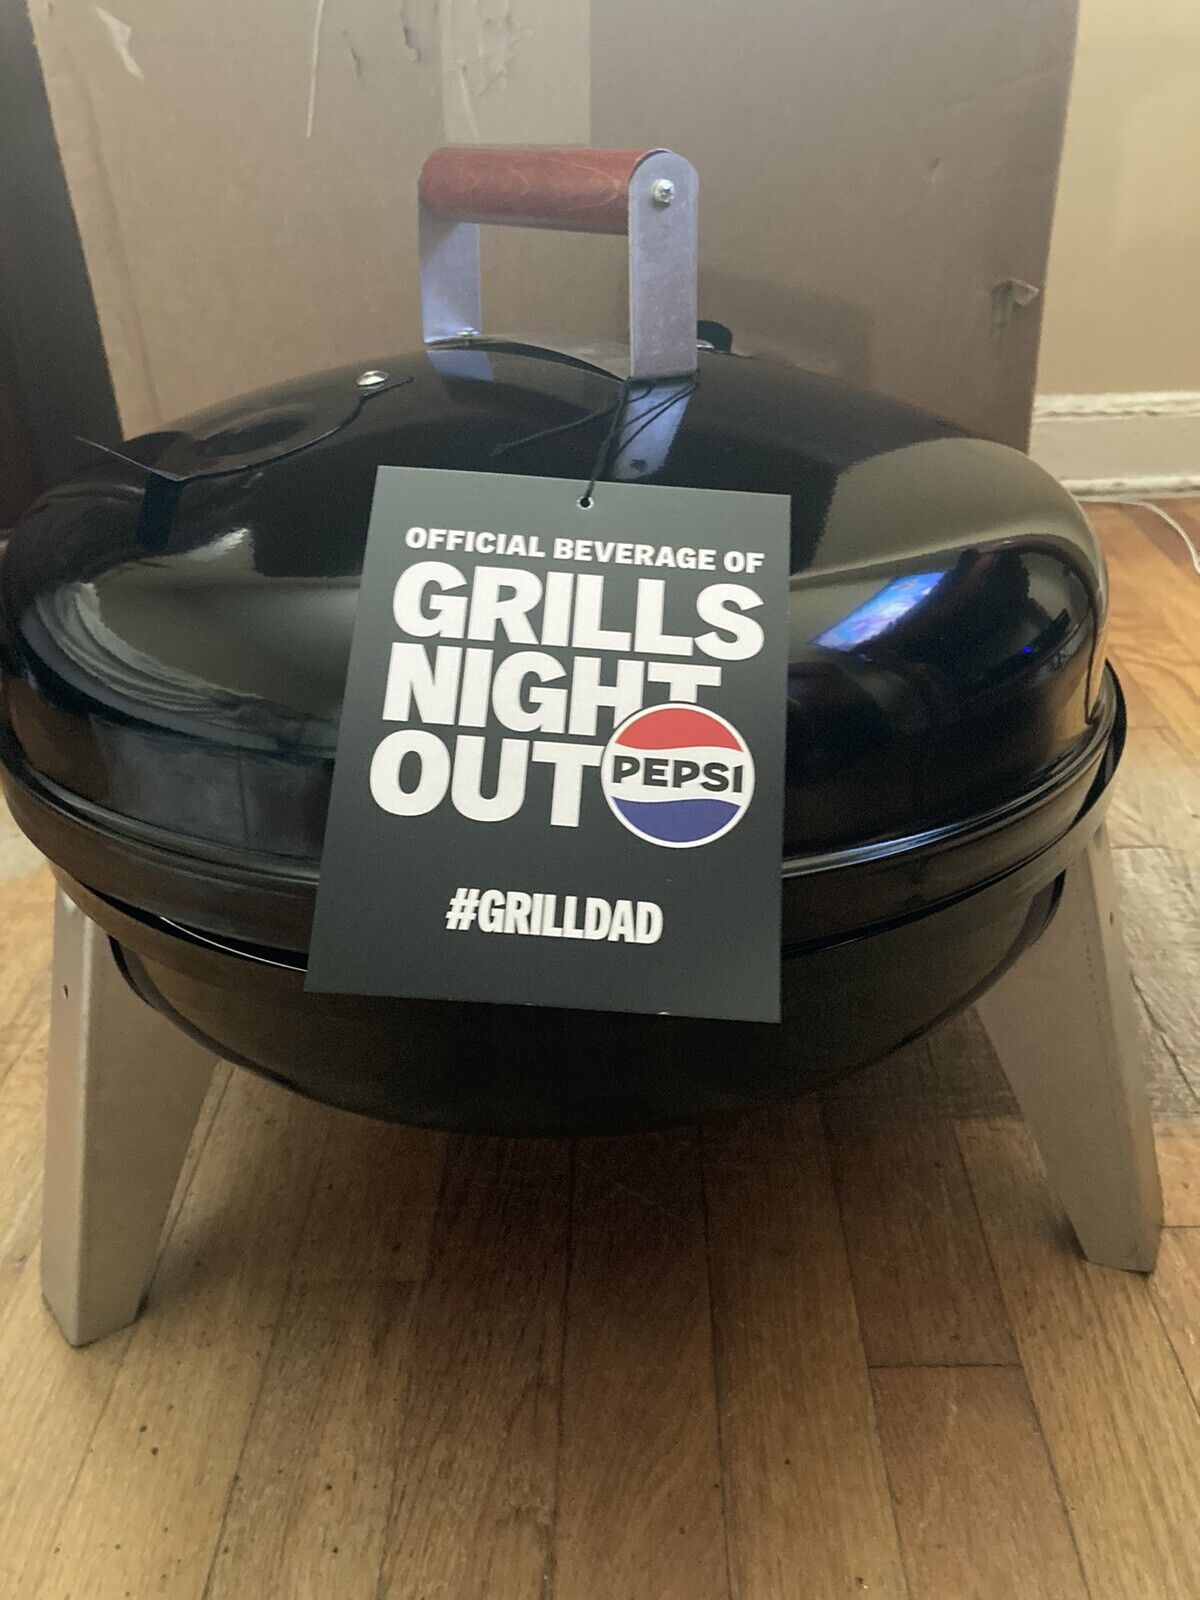 Pepsi Limited Edition Grill. (Grills Night Out Sweepstakes)